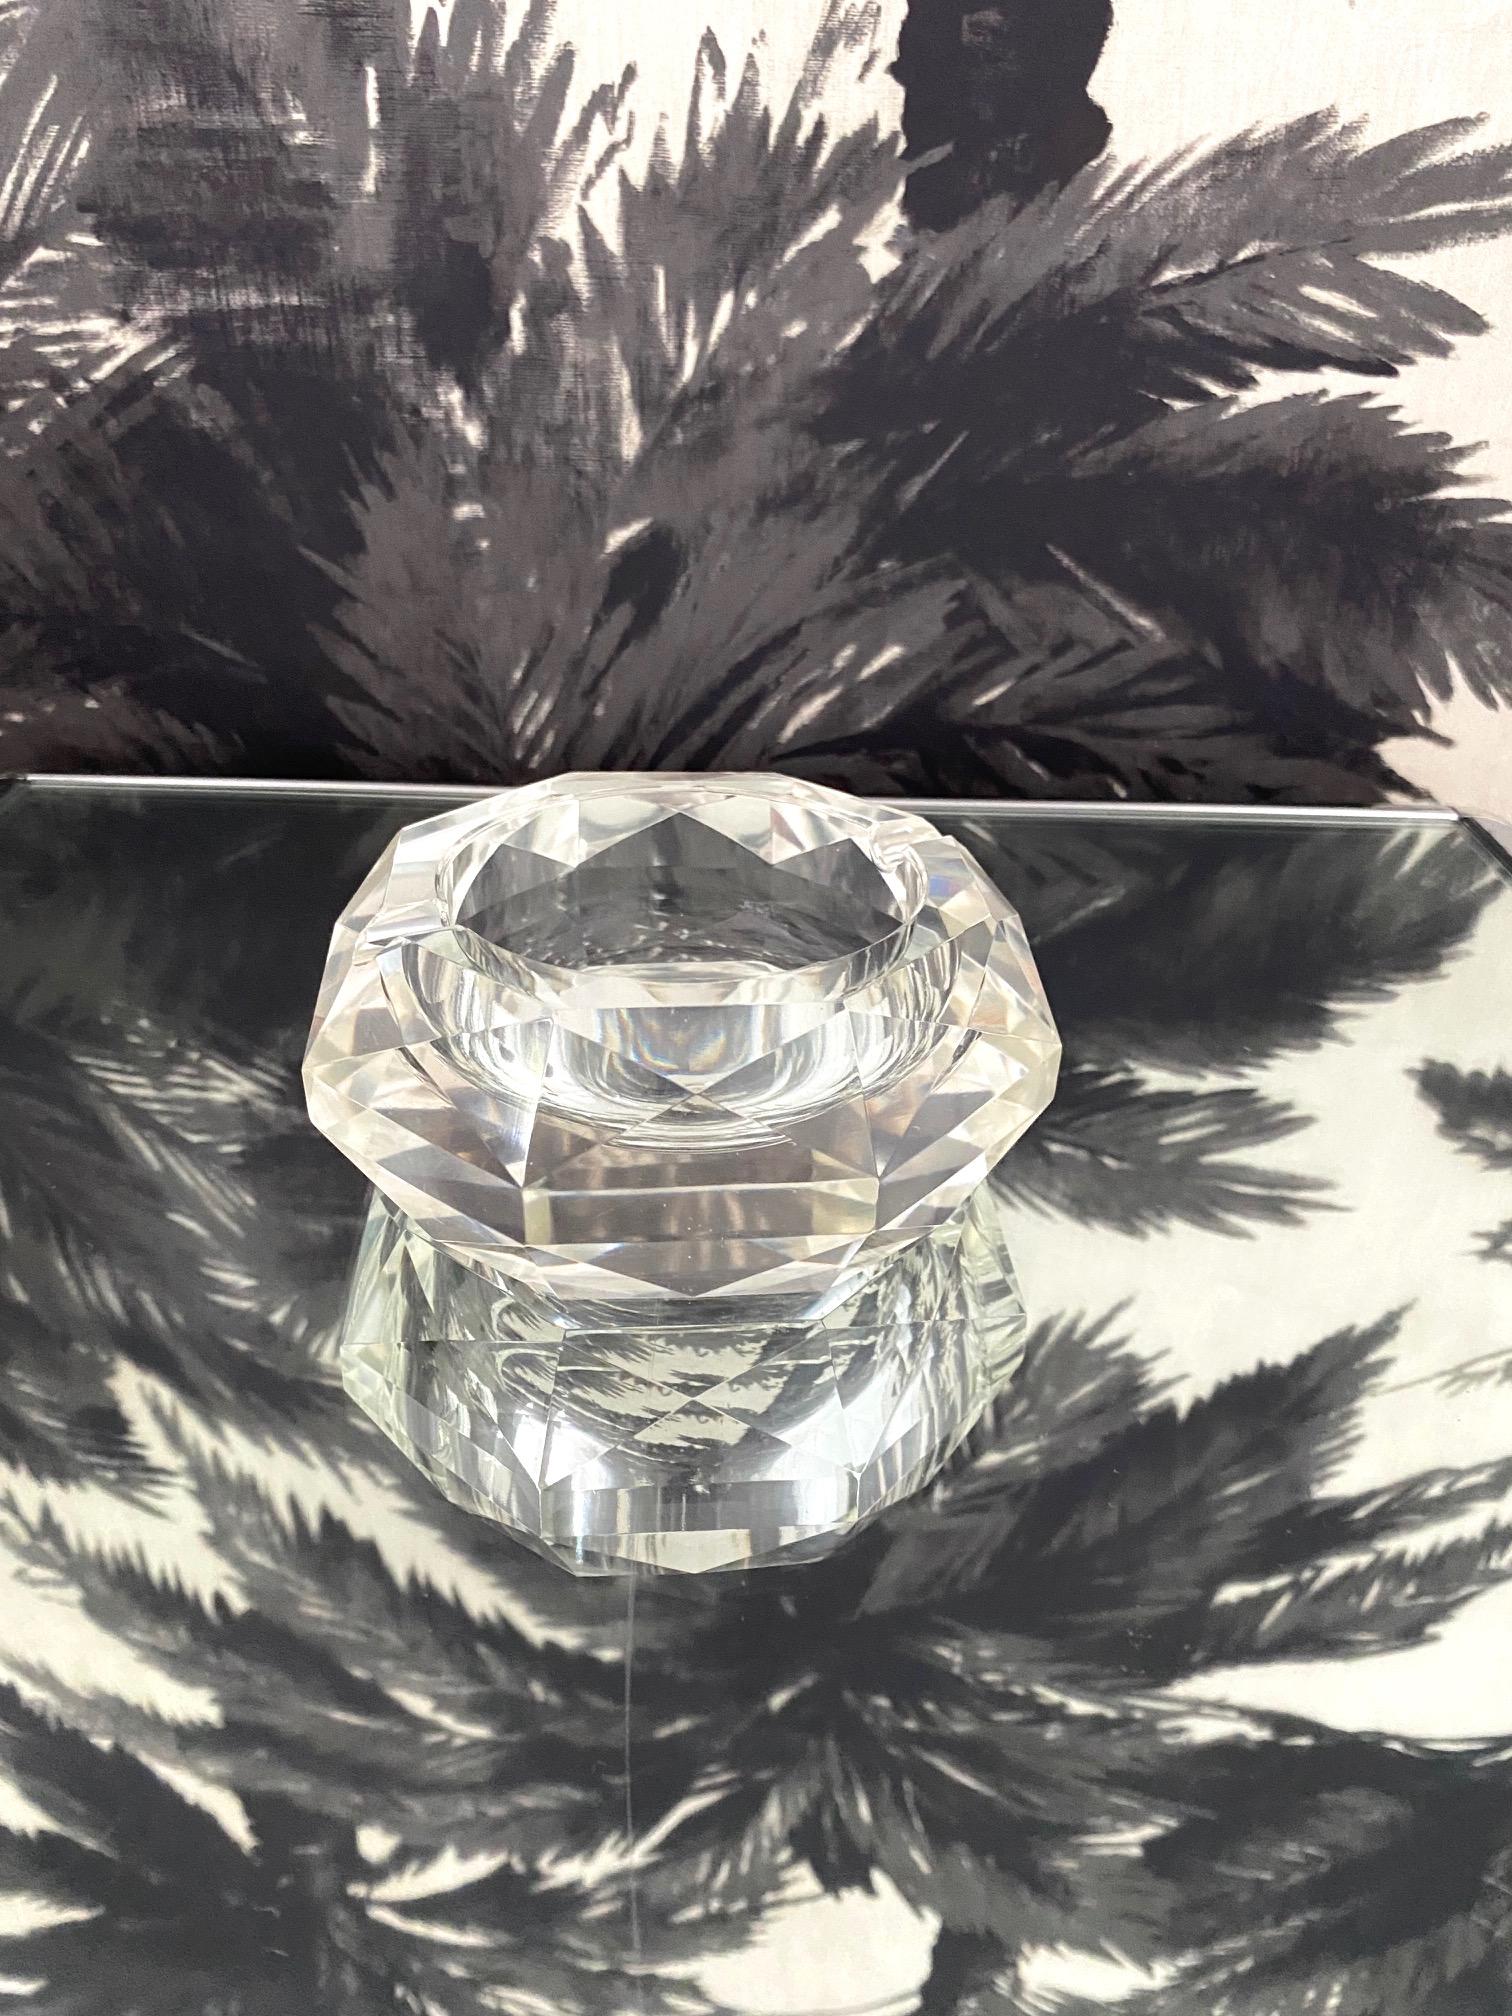 Beveled Italian Murano Prism Glass Ashtray with Faceted Design, c. 1960's